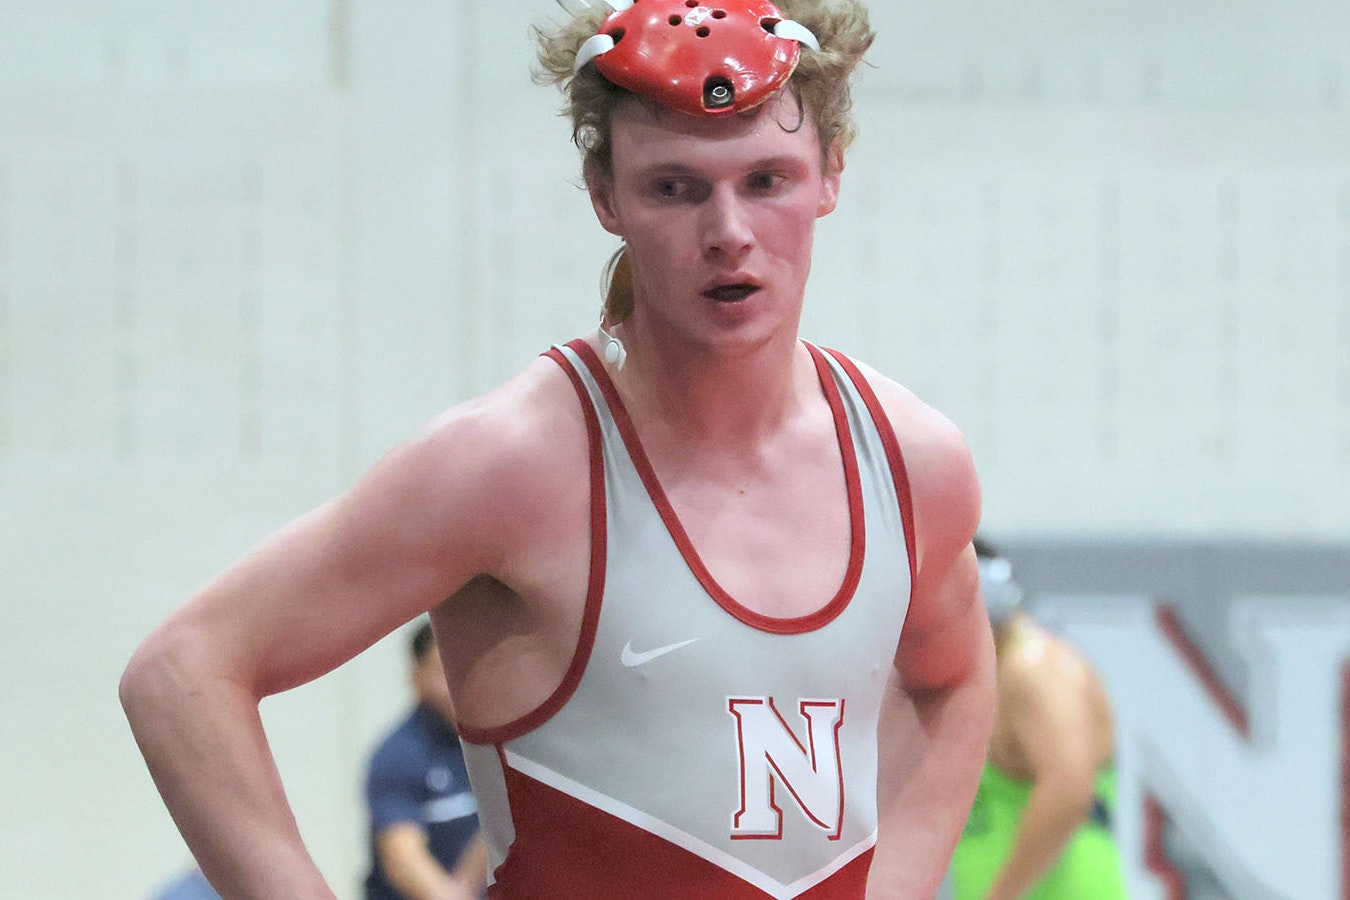 Kendall Cummings wrestles for Northwest College in Powell, Wyoming.